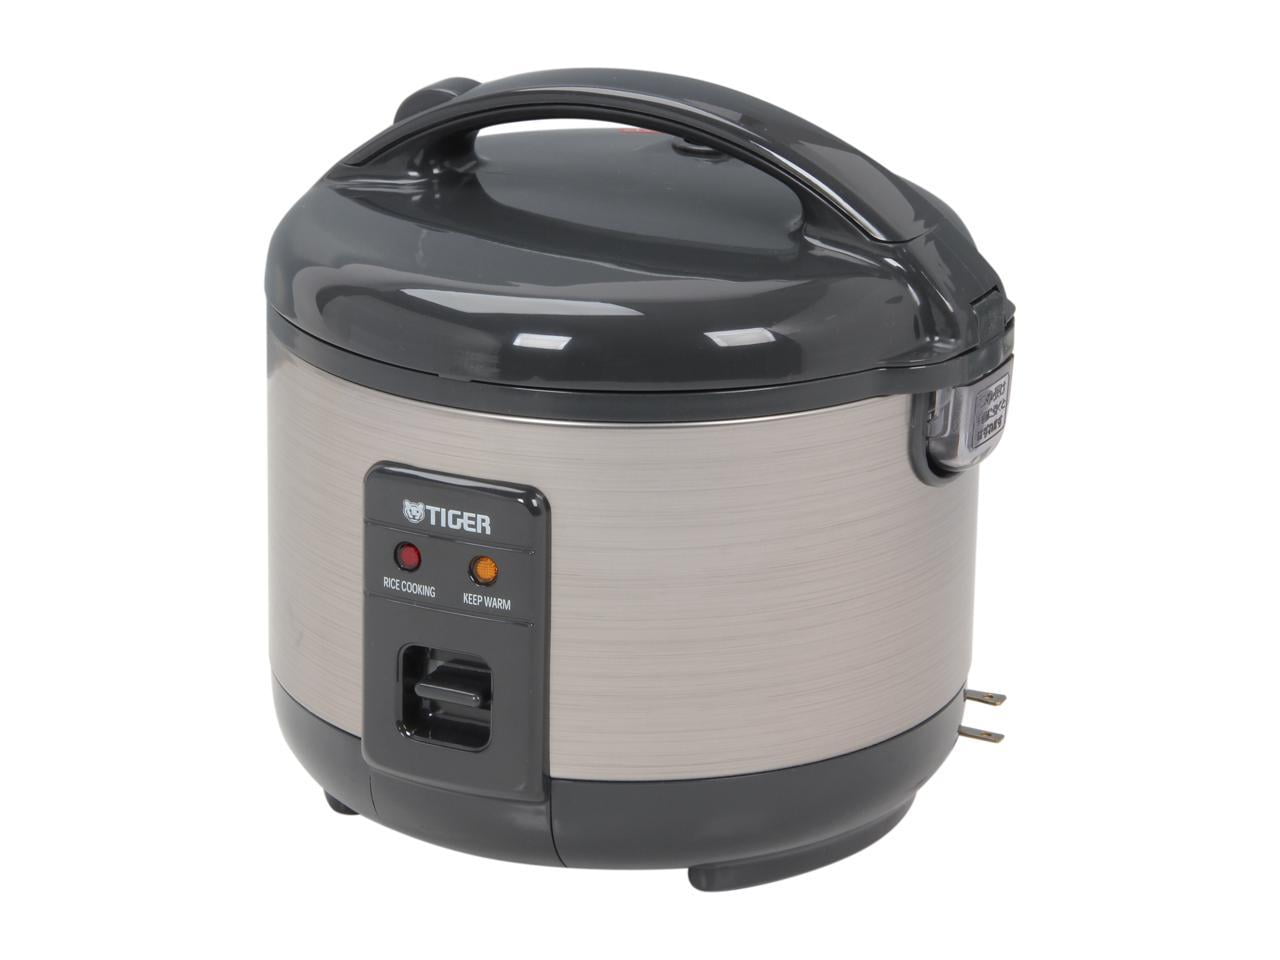  Cuisinart CRC-400P1 4 Cup Rice Cooker, Stainless Steel  Exterior: Rice Steamer Cooker: Home & Kitchen